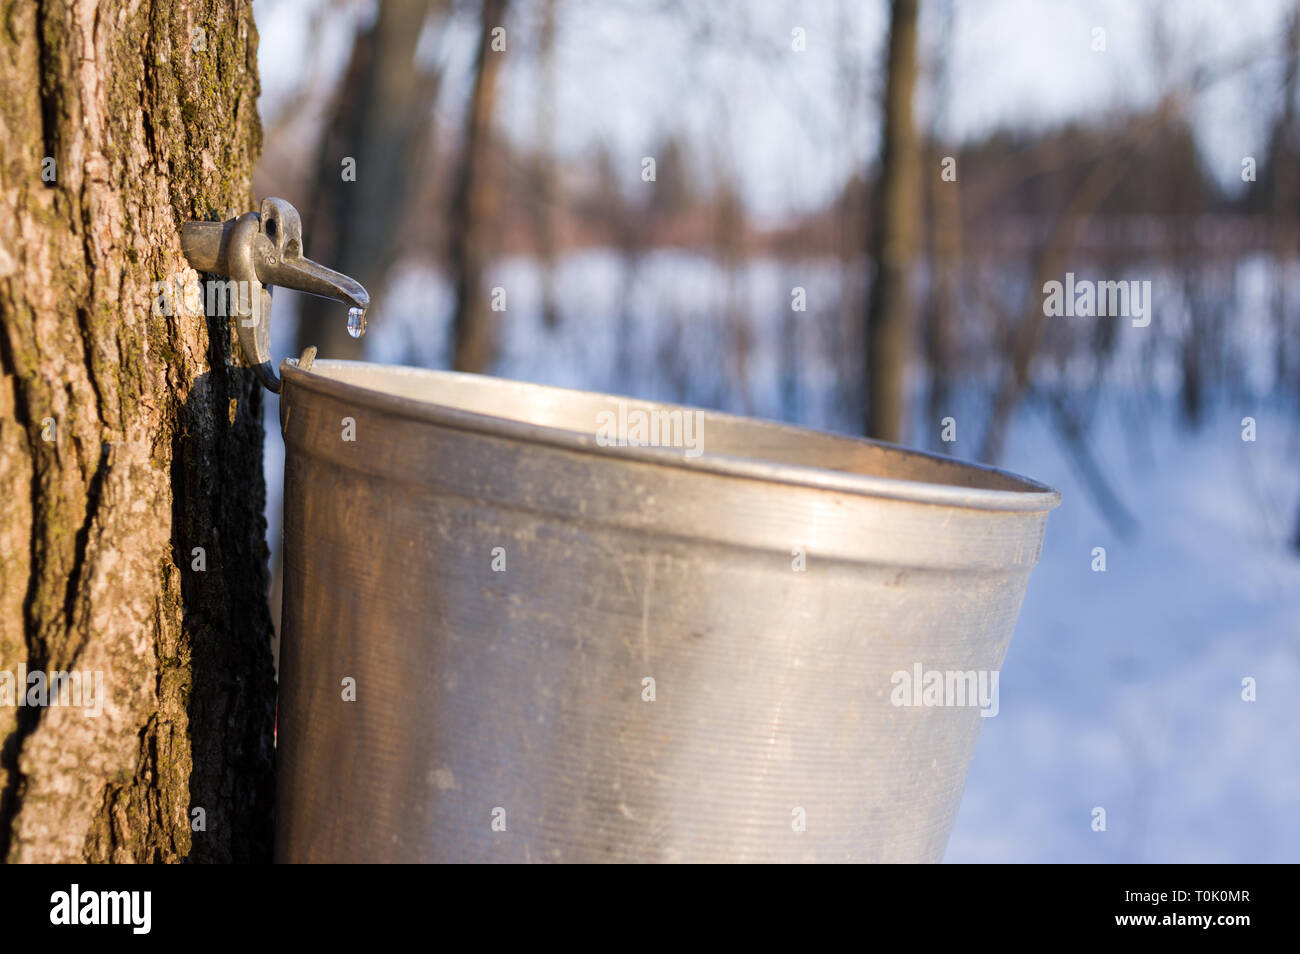 Ottawa, Ontario, Canada. 20th Mar, 2019. Maple syrup season has started as spring 2019 arrives in Ottawa, Ontario, Canada. Credit: Vince F/Alamy Live News Stock Photo